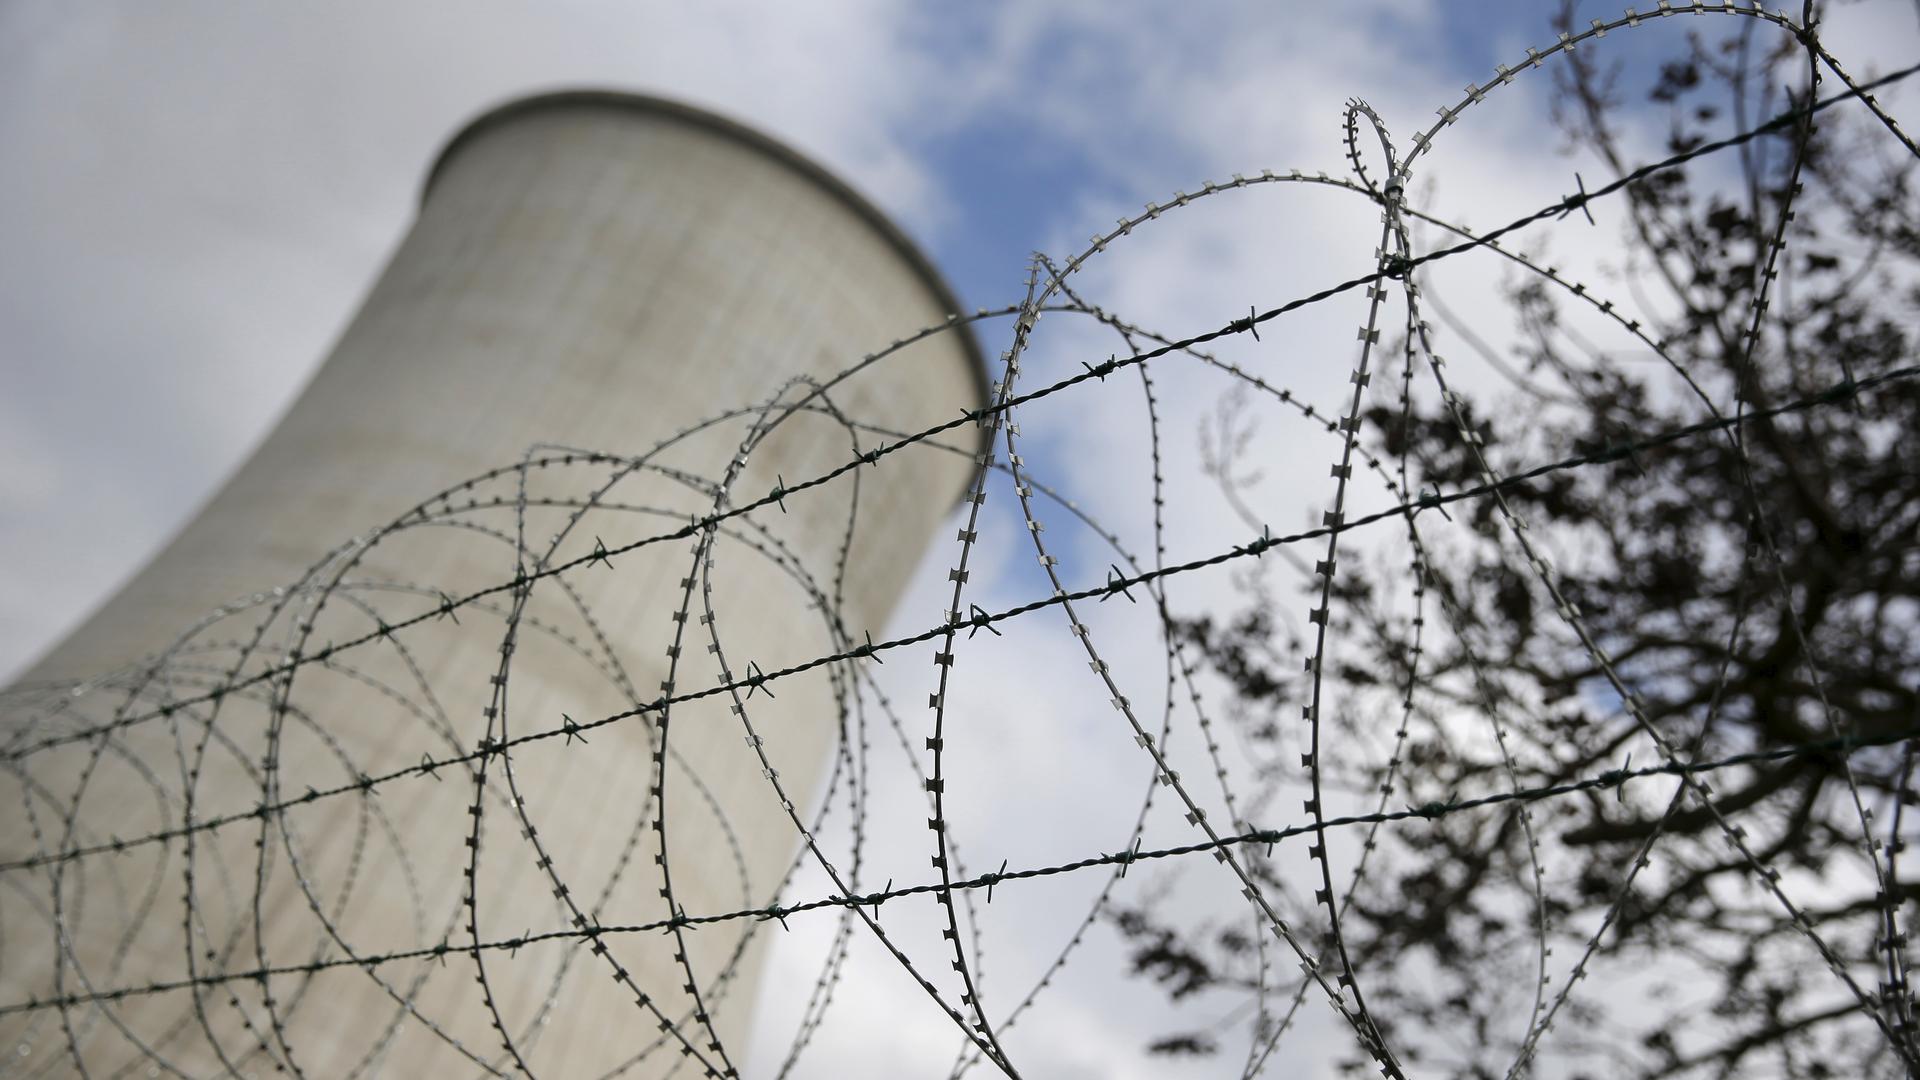 Barbed wire guarding the entrance to a nuclear power station in Belgium